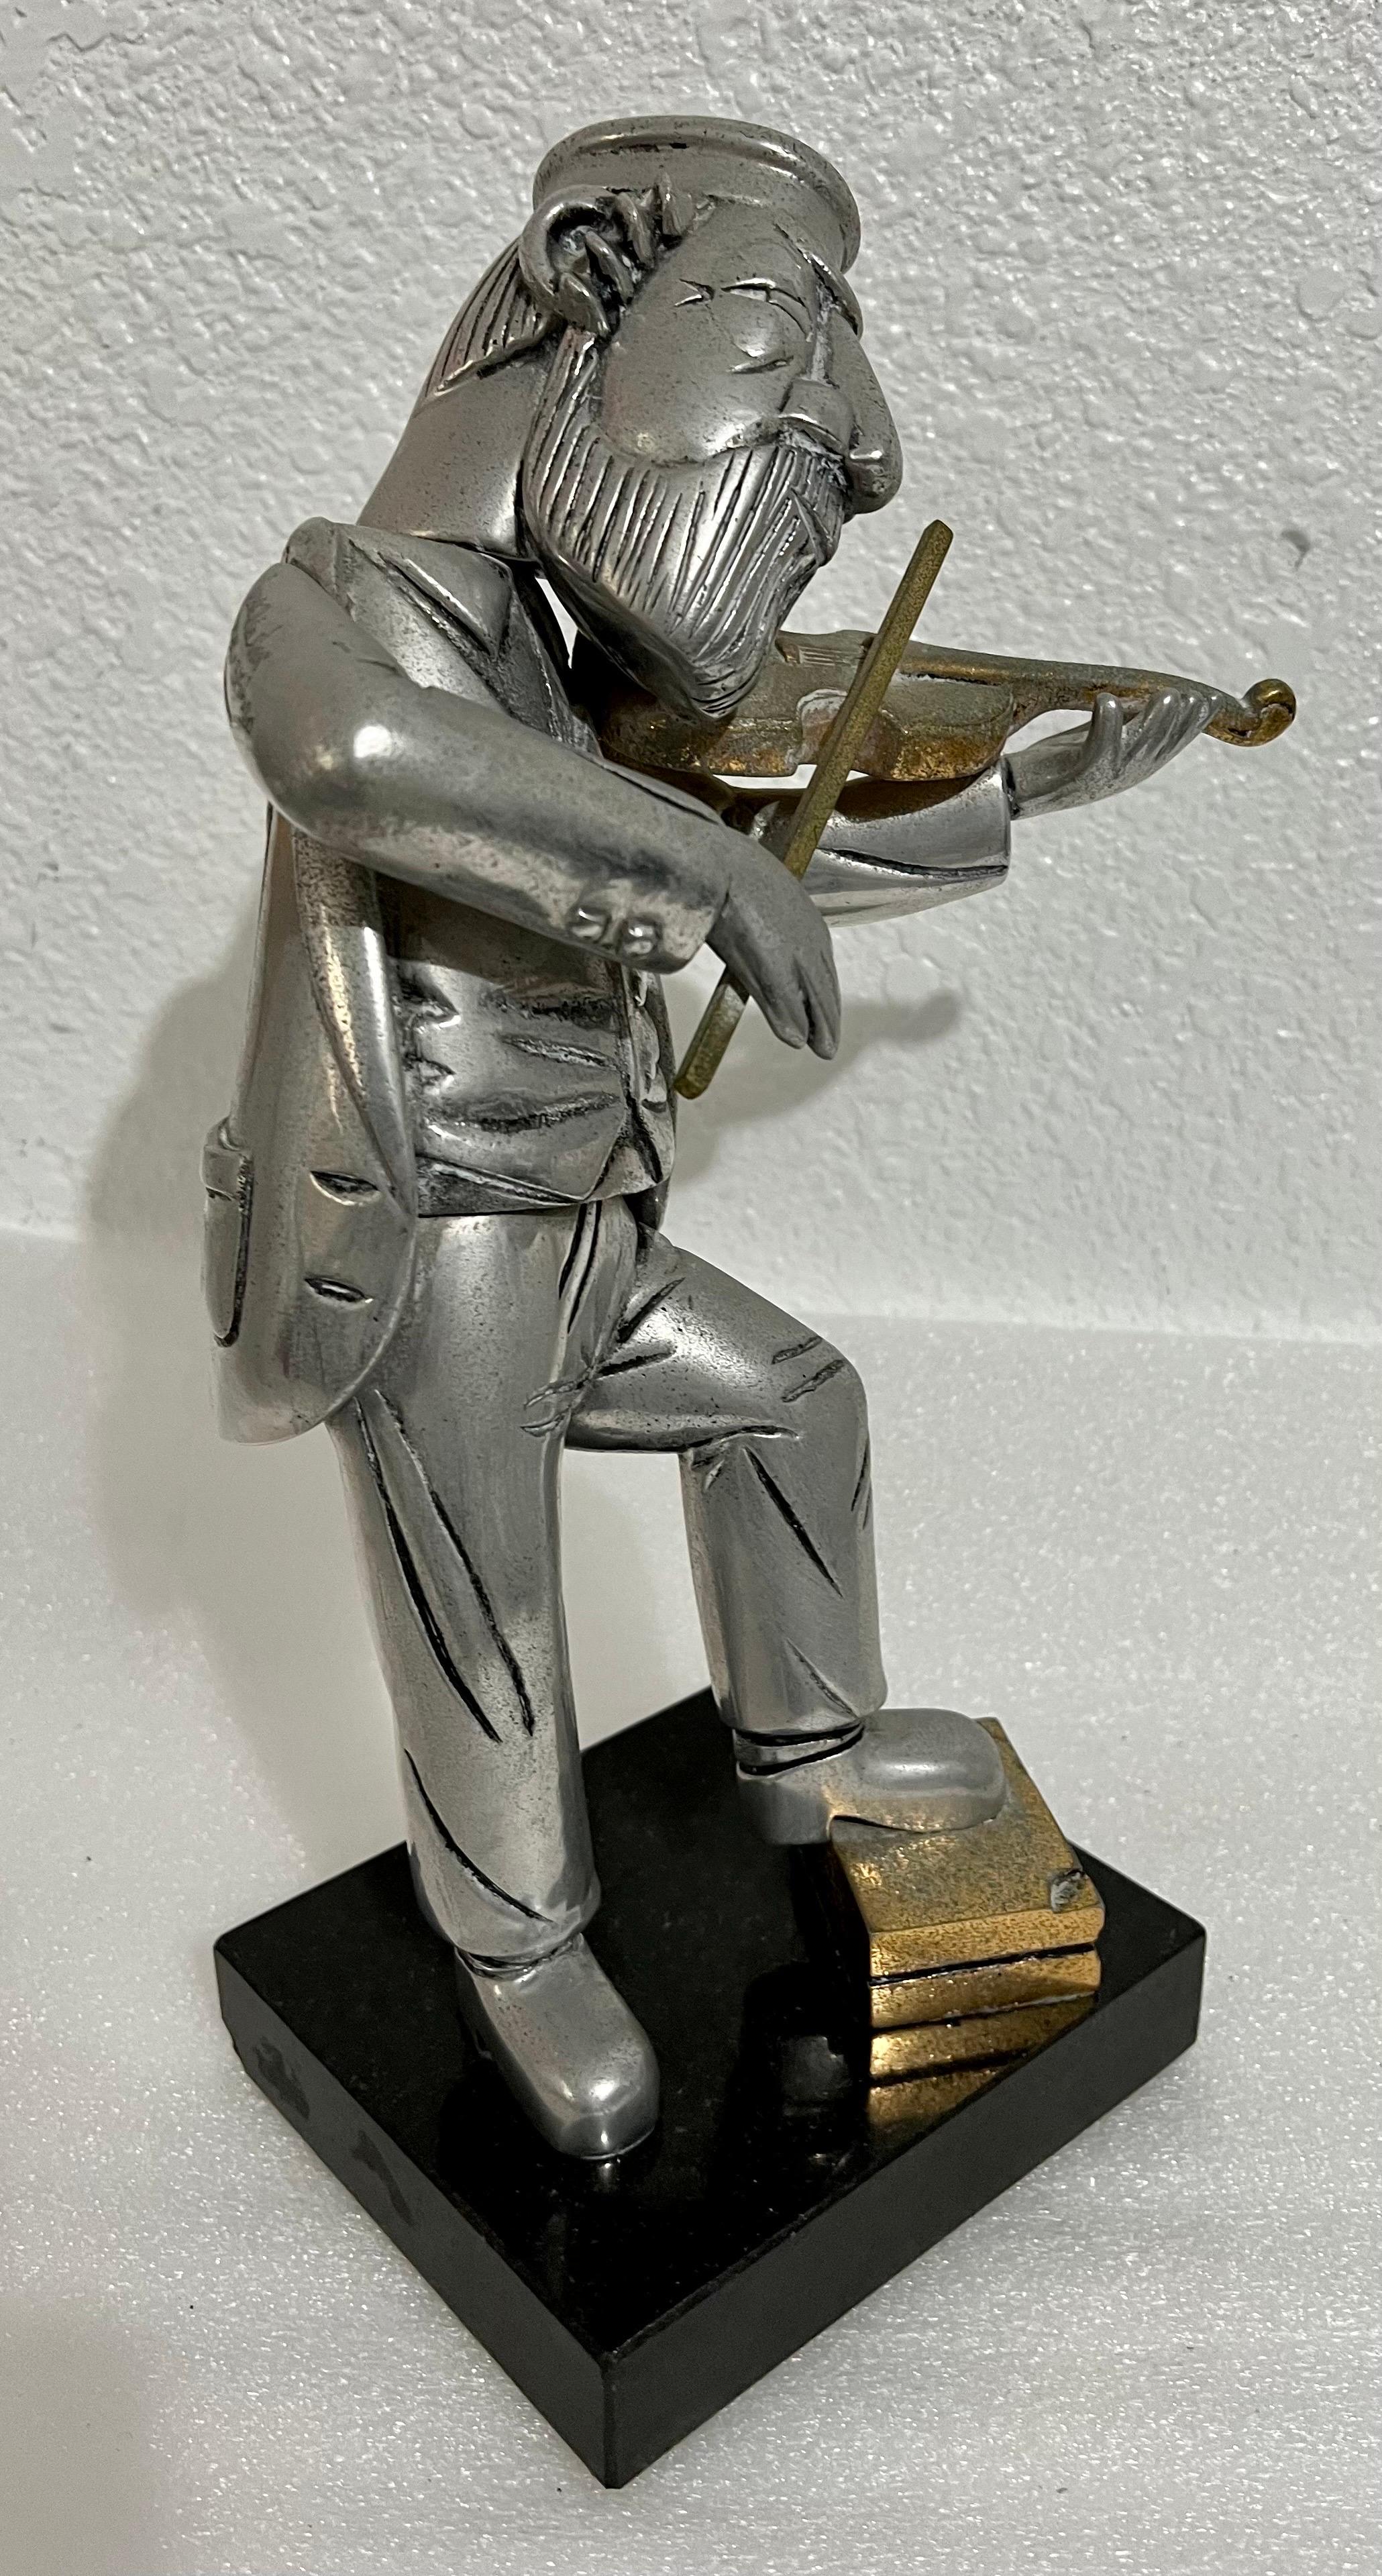 Rare Vintage unusual piece.
In this bronze or metal sculpture by Frank Meisler, the artist depicts a Klezmer violin player The figure seems cartoon-like with exaggerated facial features.

FRANK MEISLER
Gdansk, Poland - Israel, b. 1929
Frank Meisler